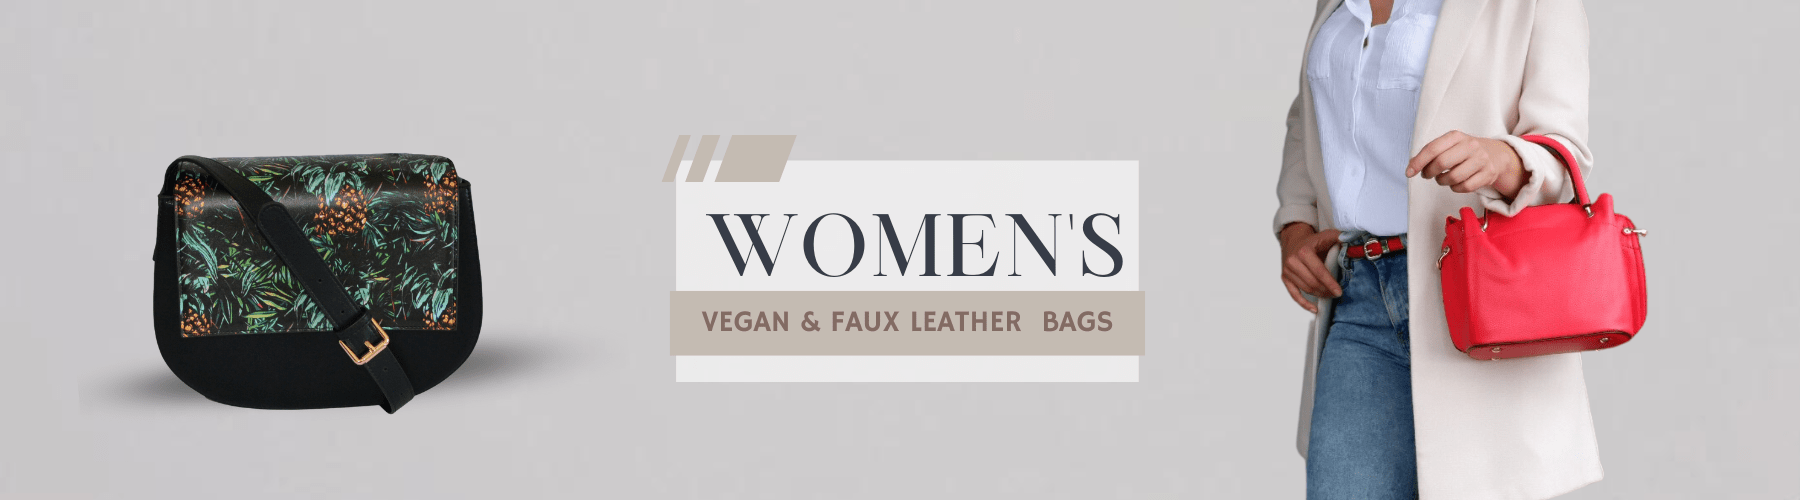 BAILEY The 100 vegan leather bag designed for the future by Melina Bucher   Community  Kickstarter